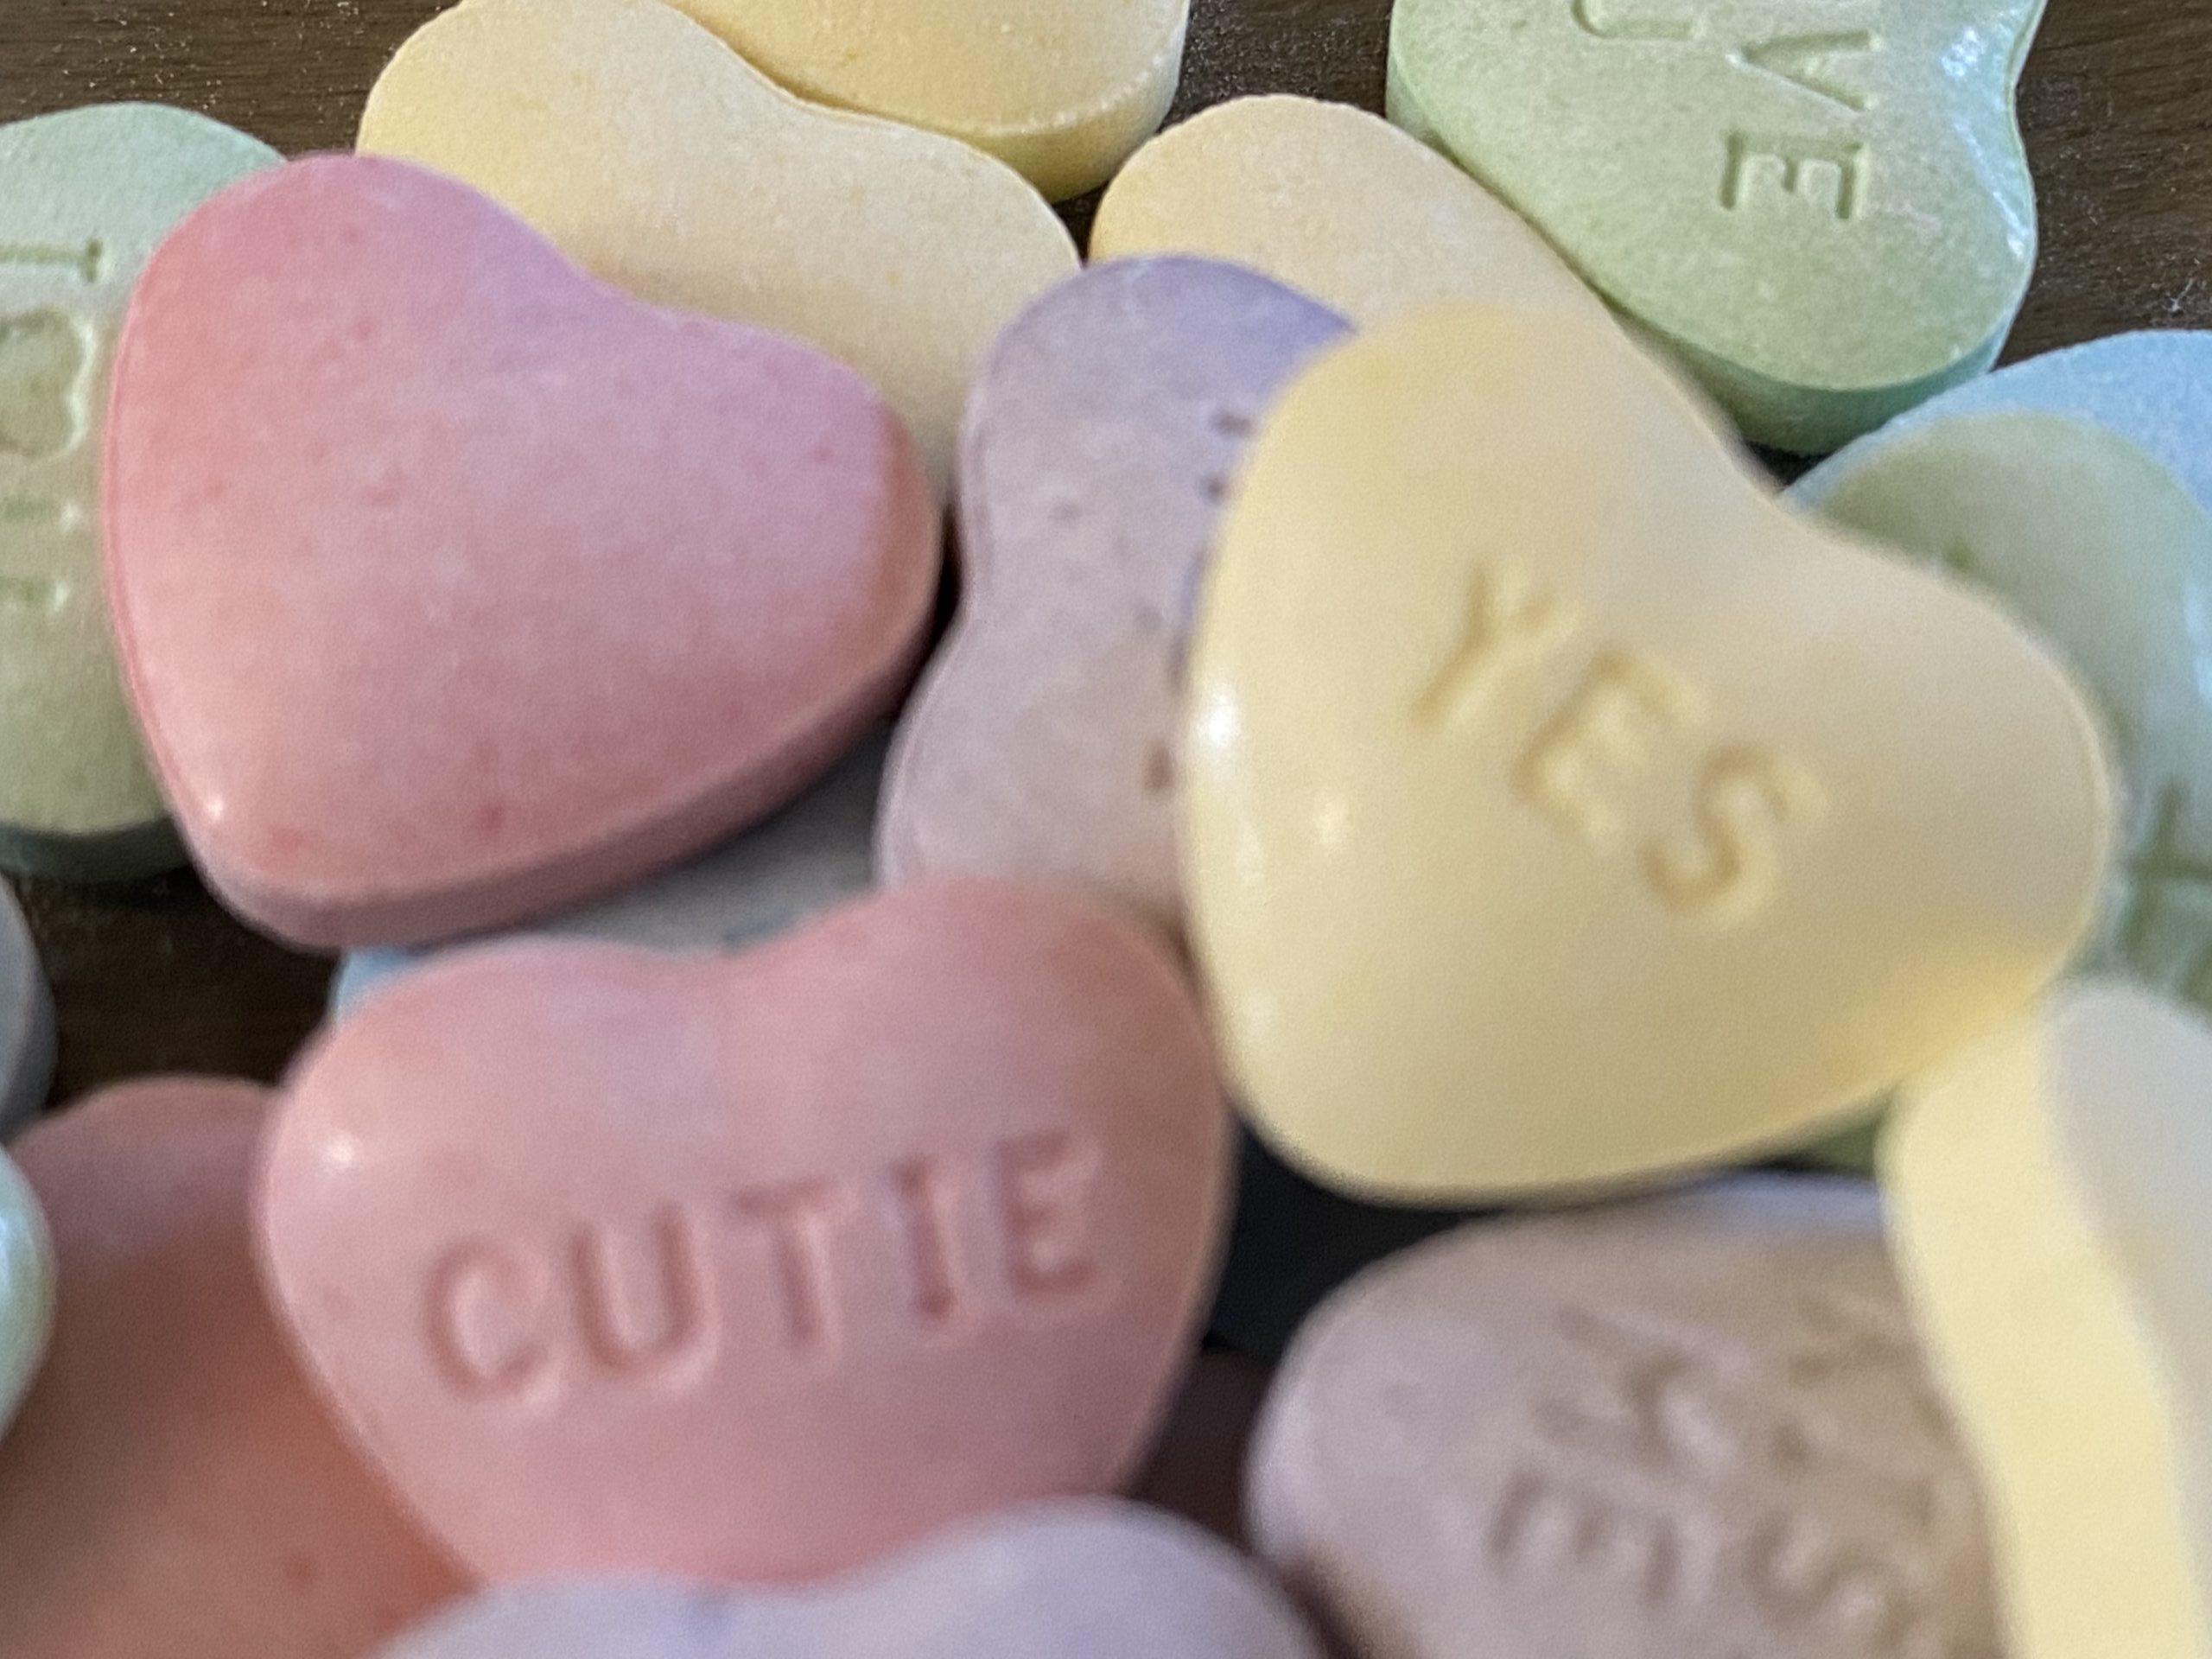 Valentine Candy Hearts